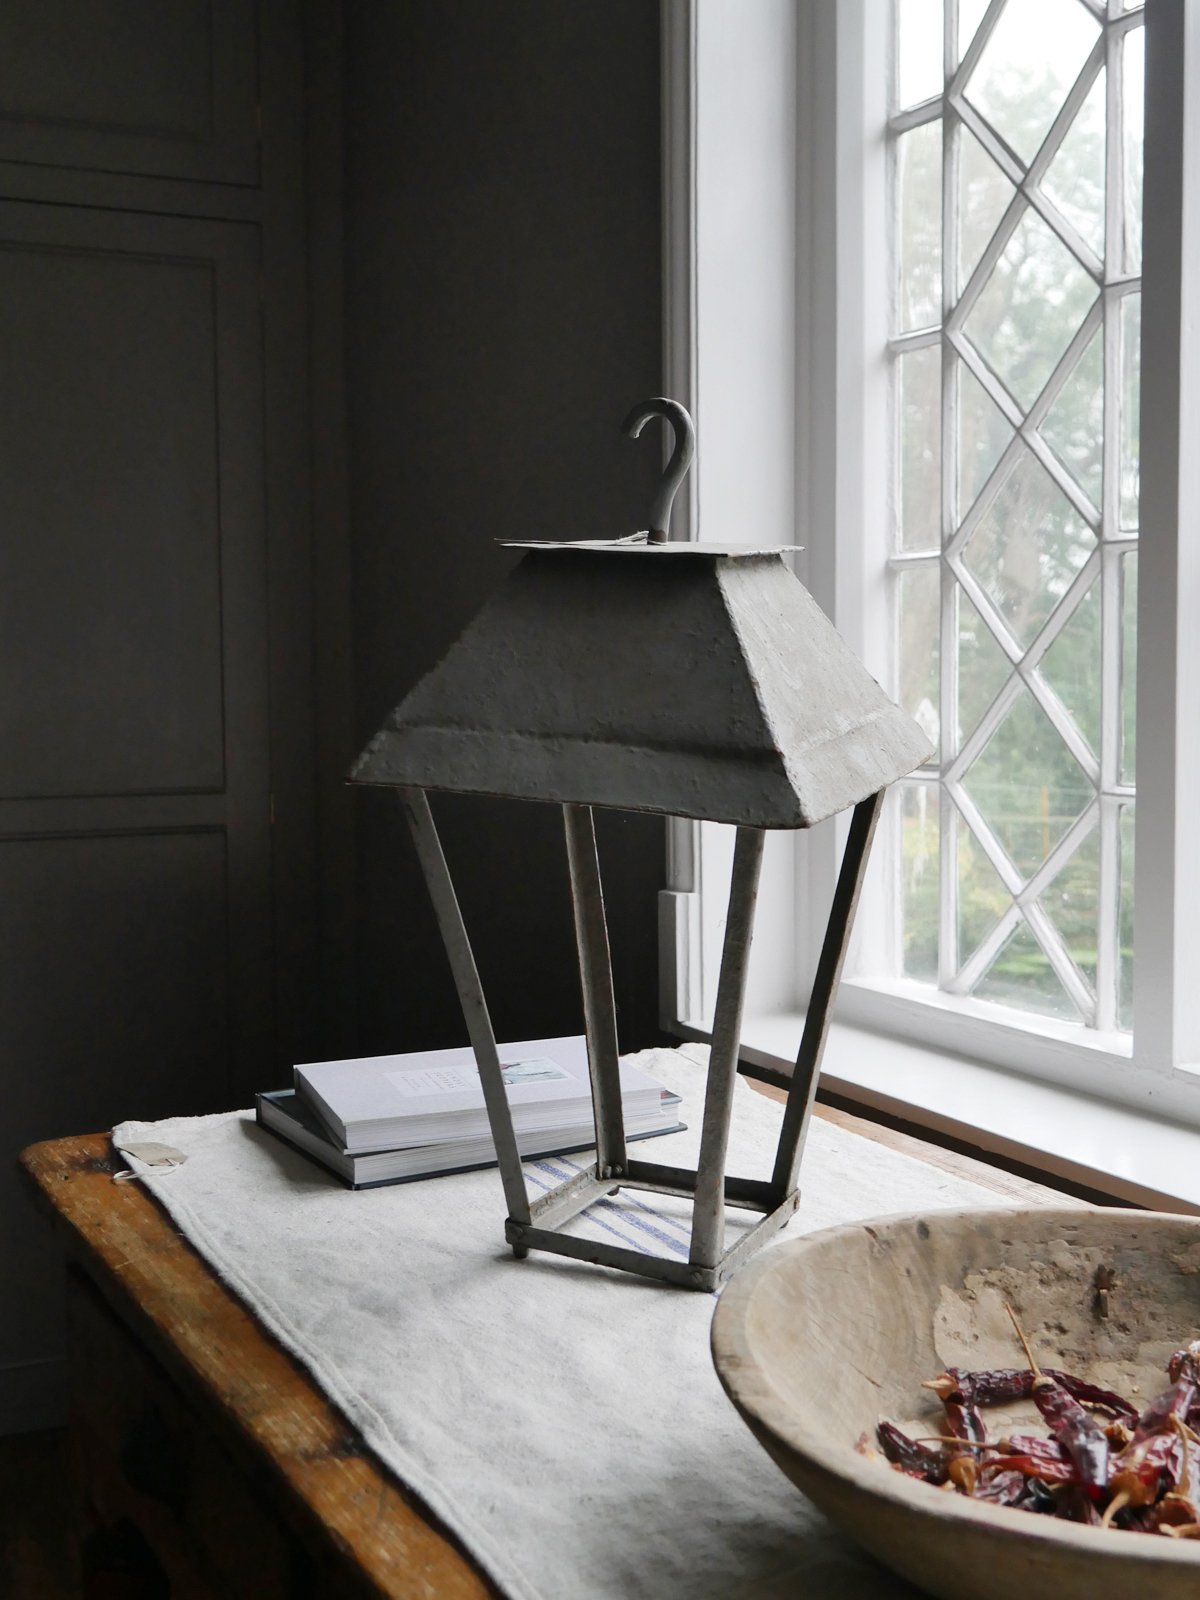 A simple lantern with a candle popped inside can transform a dull corner into something special.